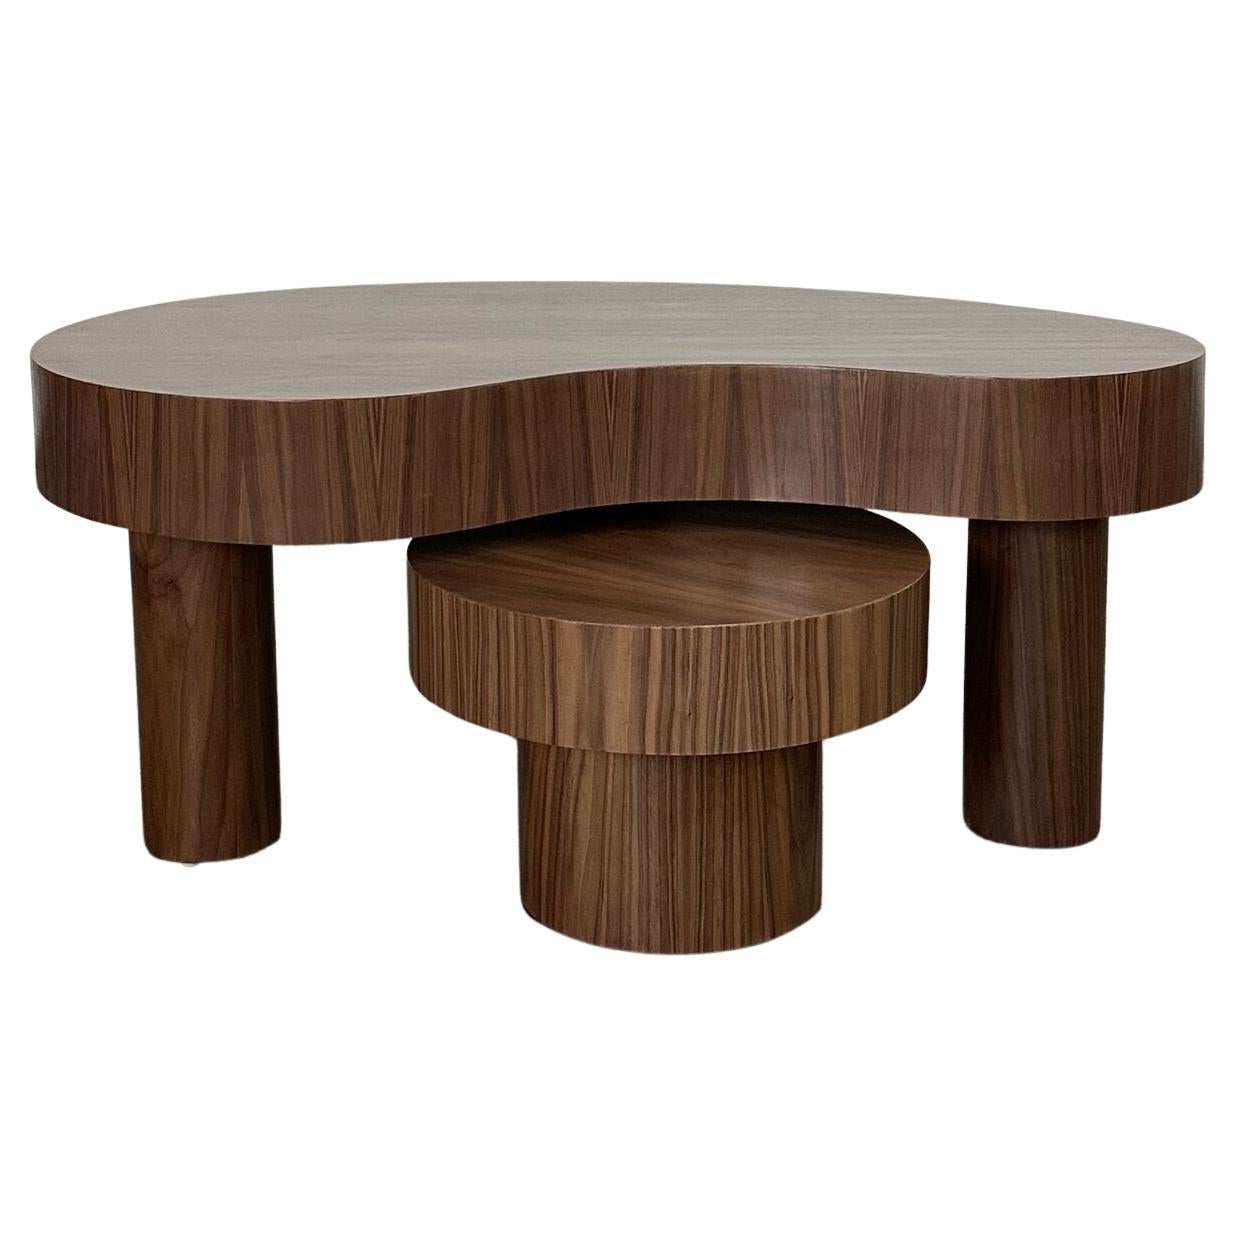 Small Kidney Two Tiered Coffee Table Set- Walnut